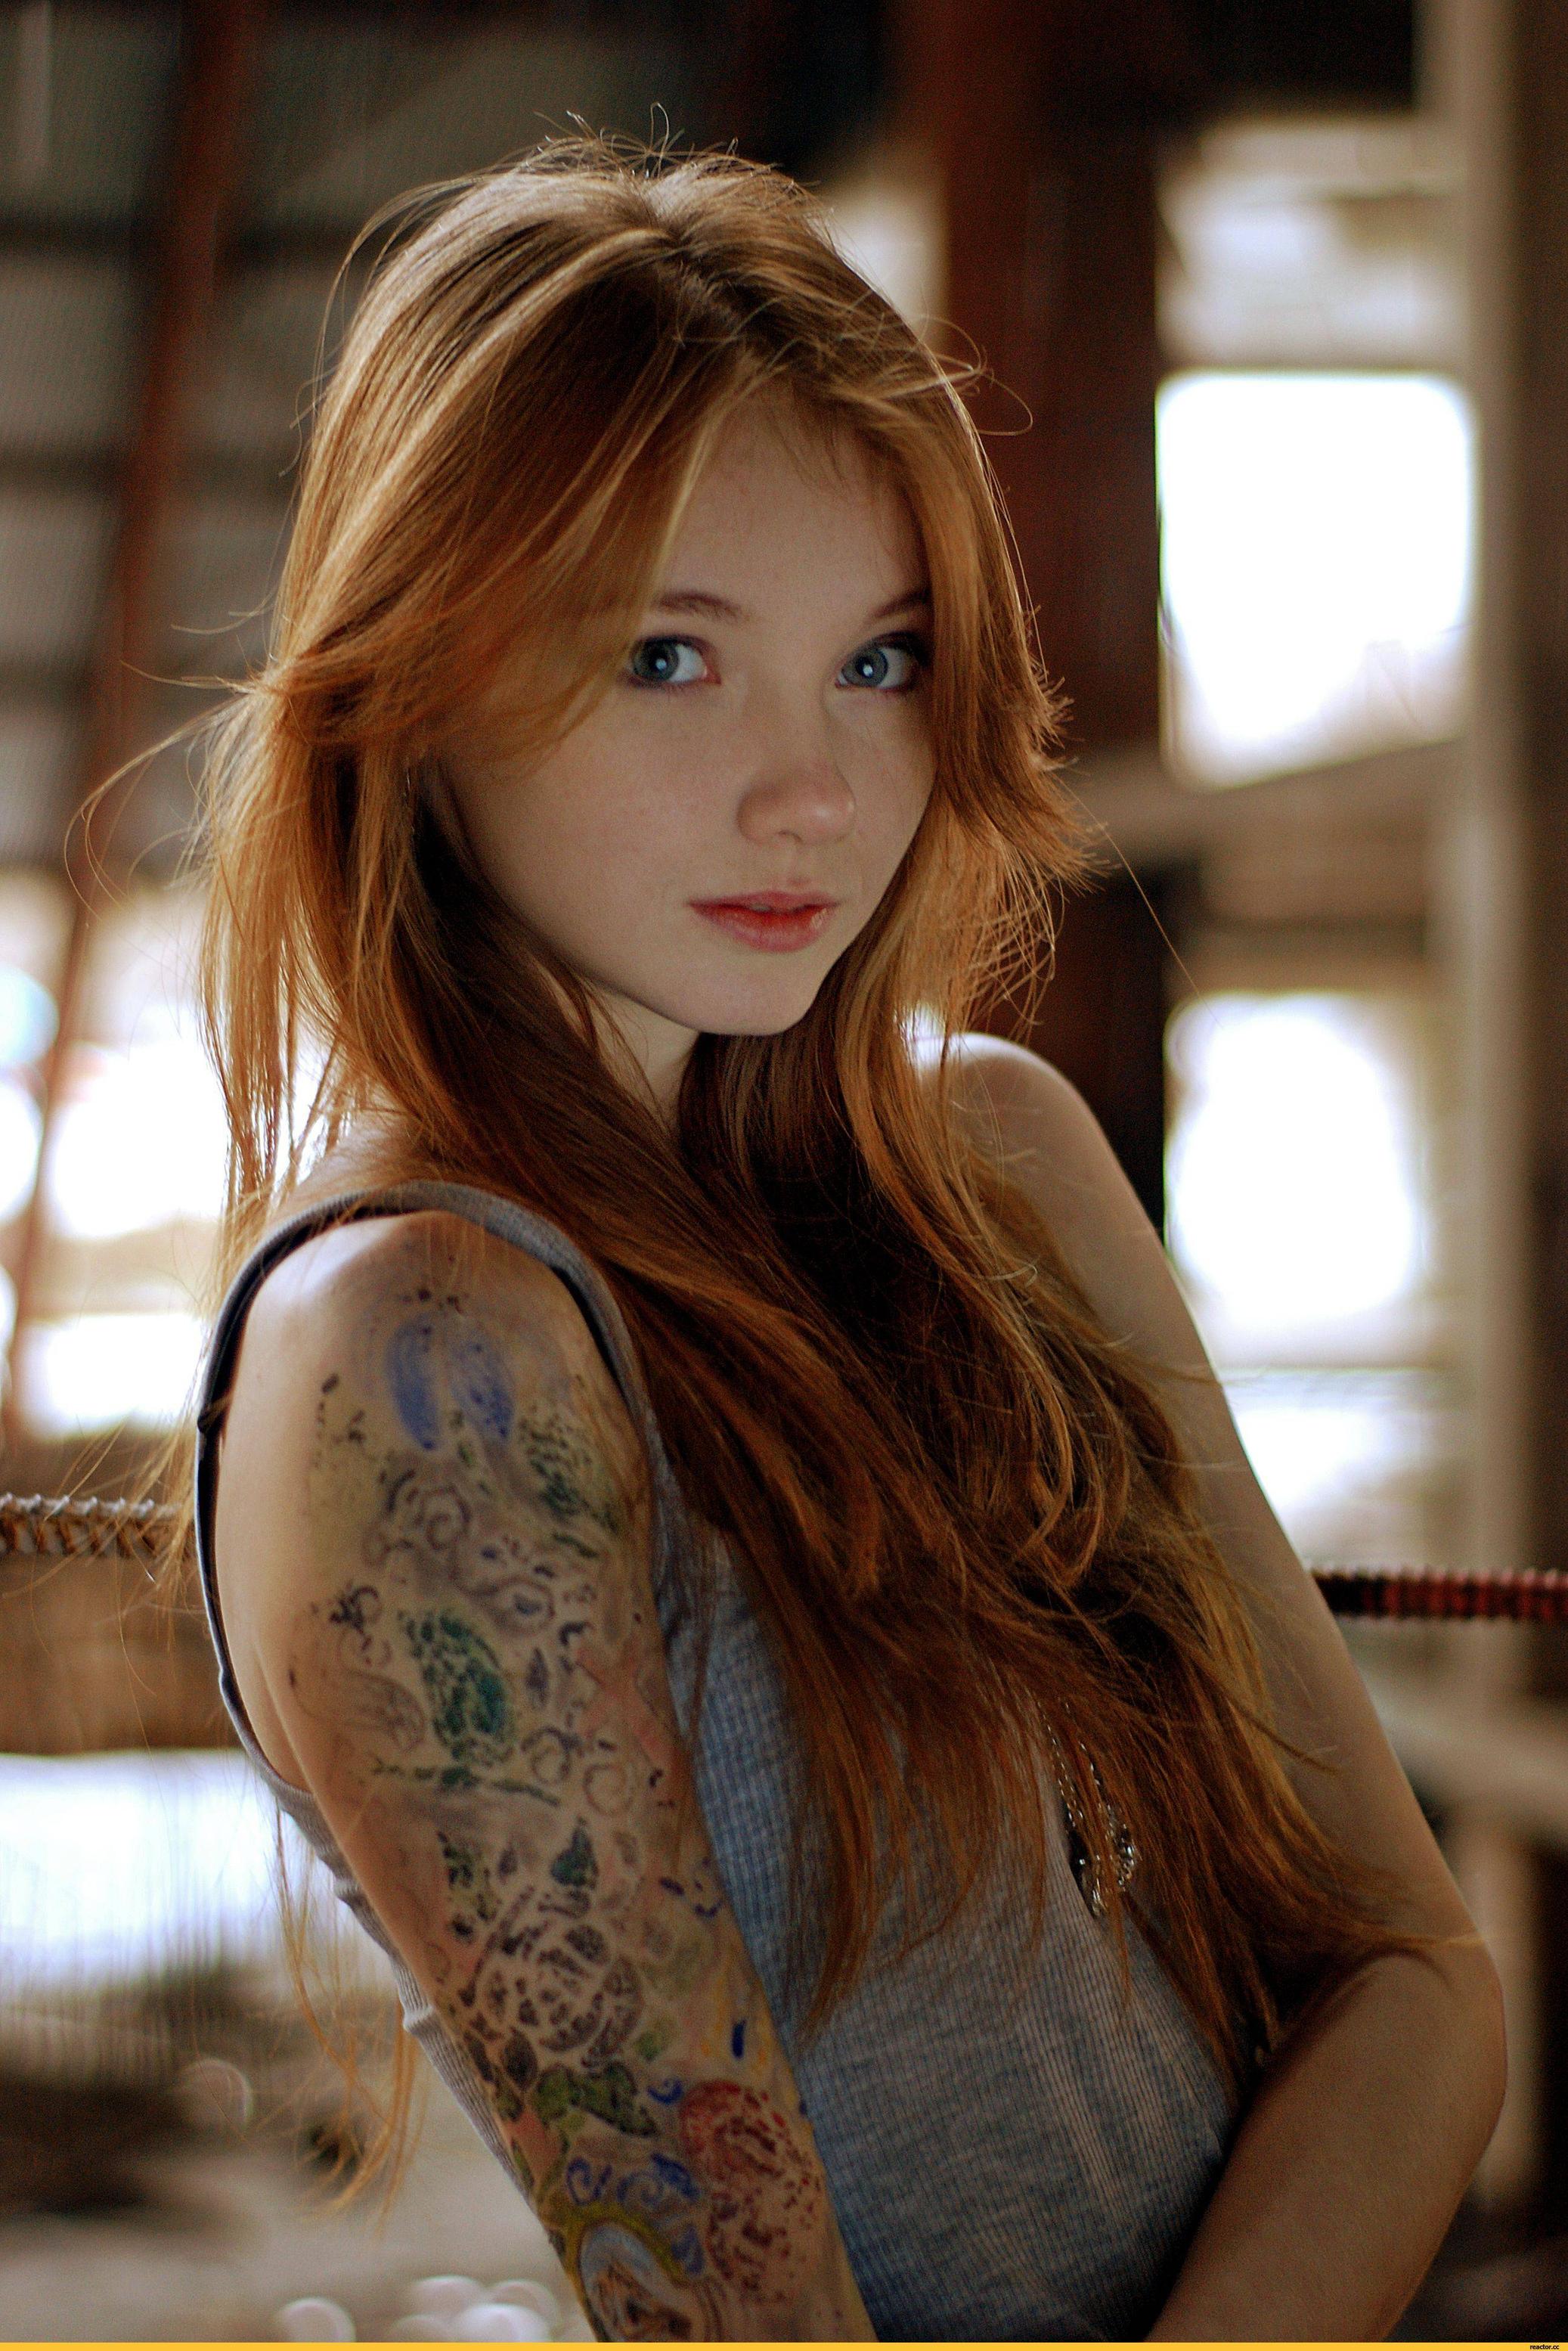 Redhead Tattoo - Red hair and a sleeve tattoo Porn Pic - EPORNER